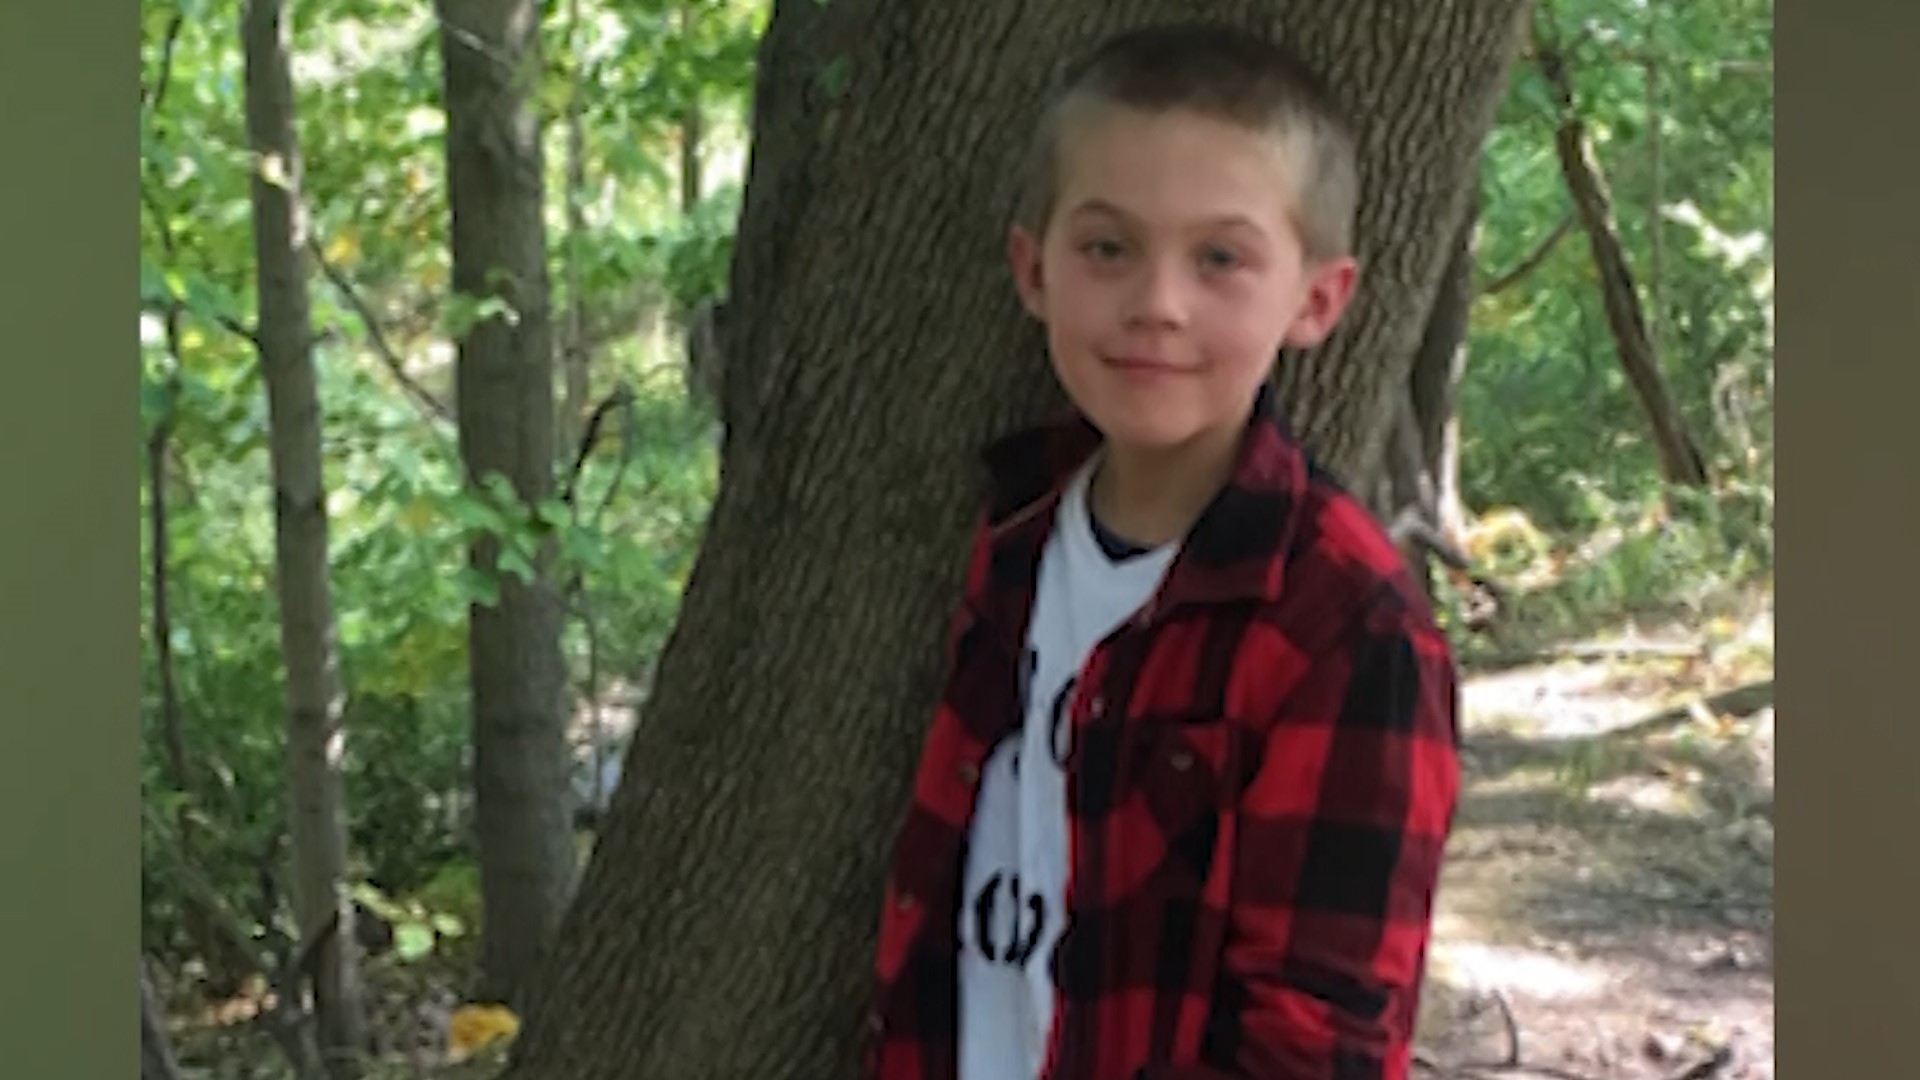 Kira Sutkay, who lives in Michigan, told ABC10 in a phone interview Tuesday that three of her children lived with 11-year-old Roman Anthony Lopez.